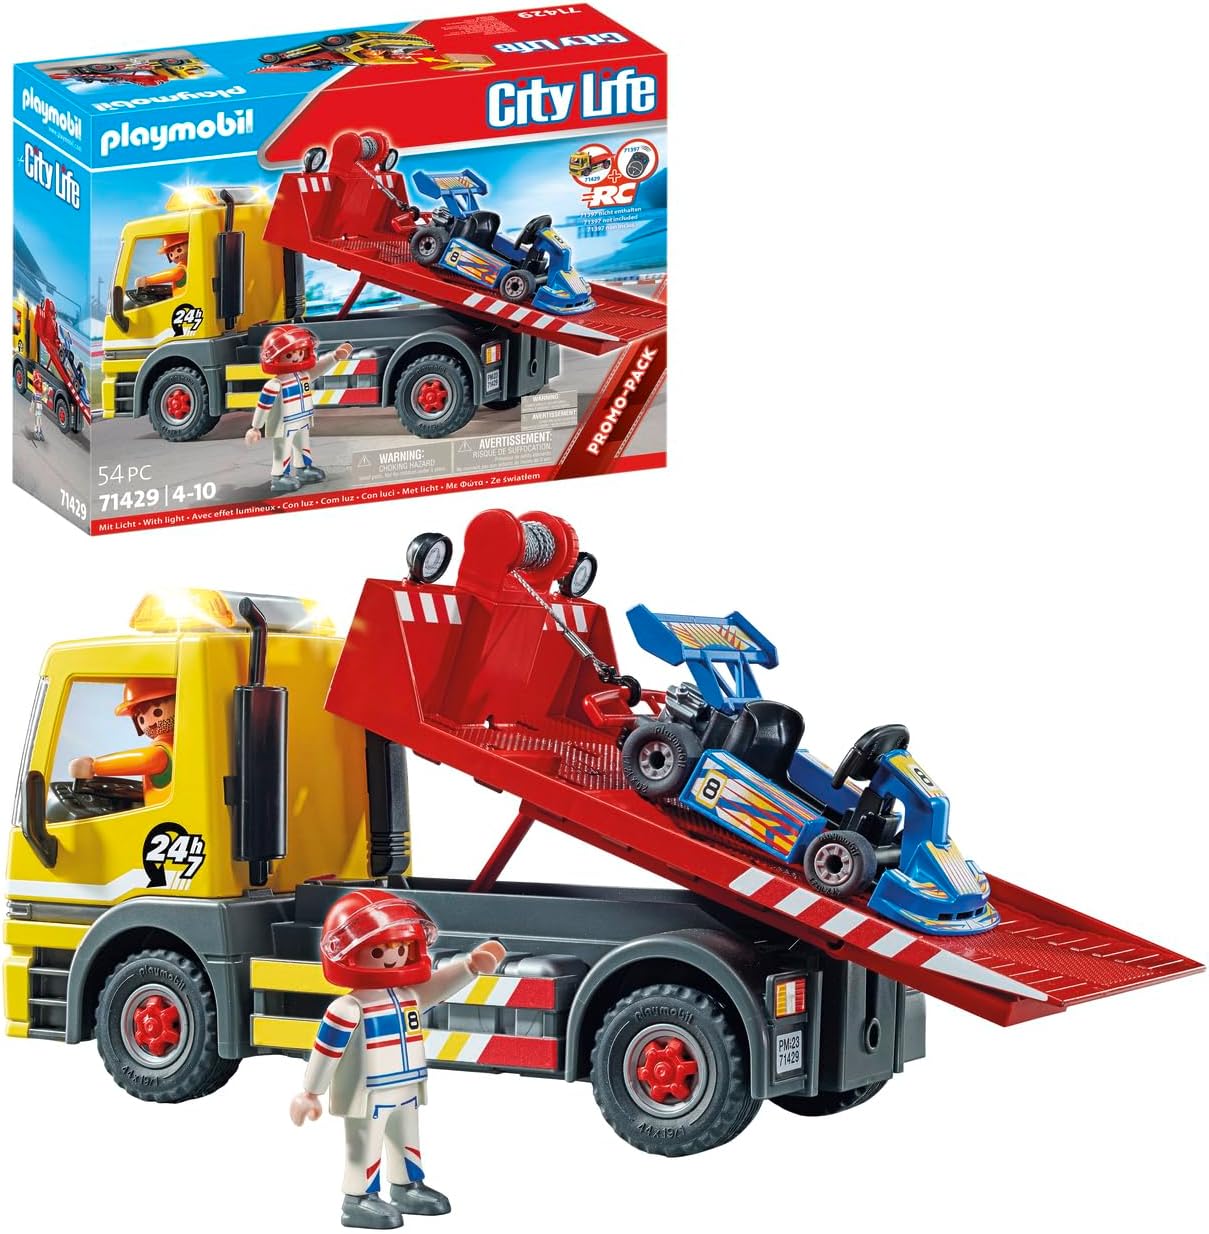 PLAYMOBIL City Life 71429 RC Vehicles Tow Service, Versatile Tow Truck with Automatic Flashing Light and Go-Kart for Exciting Rescue Missions, Toy for Children from 4 Years